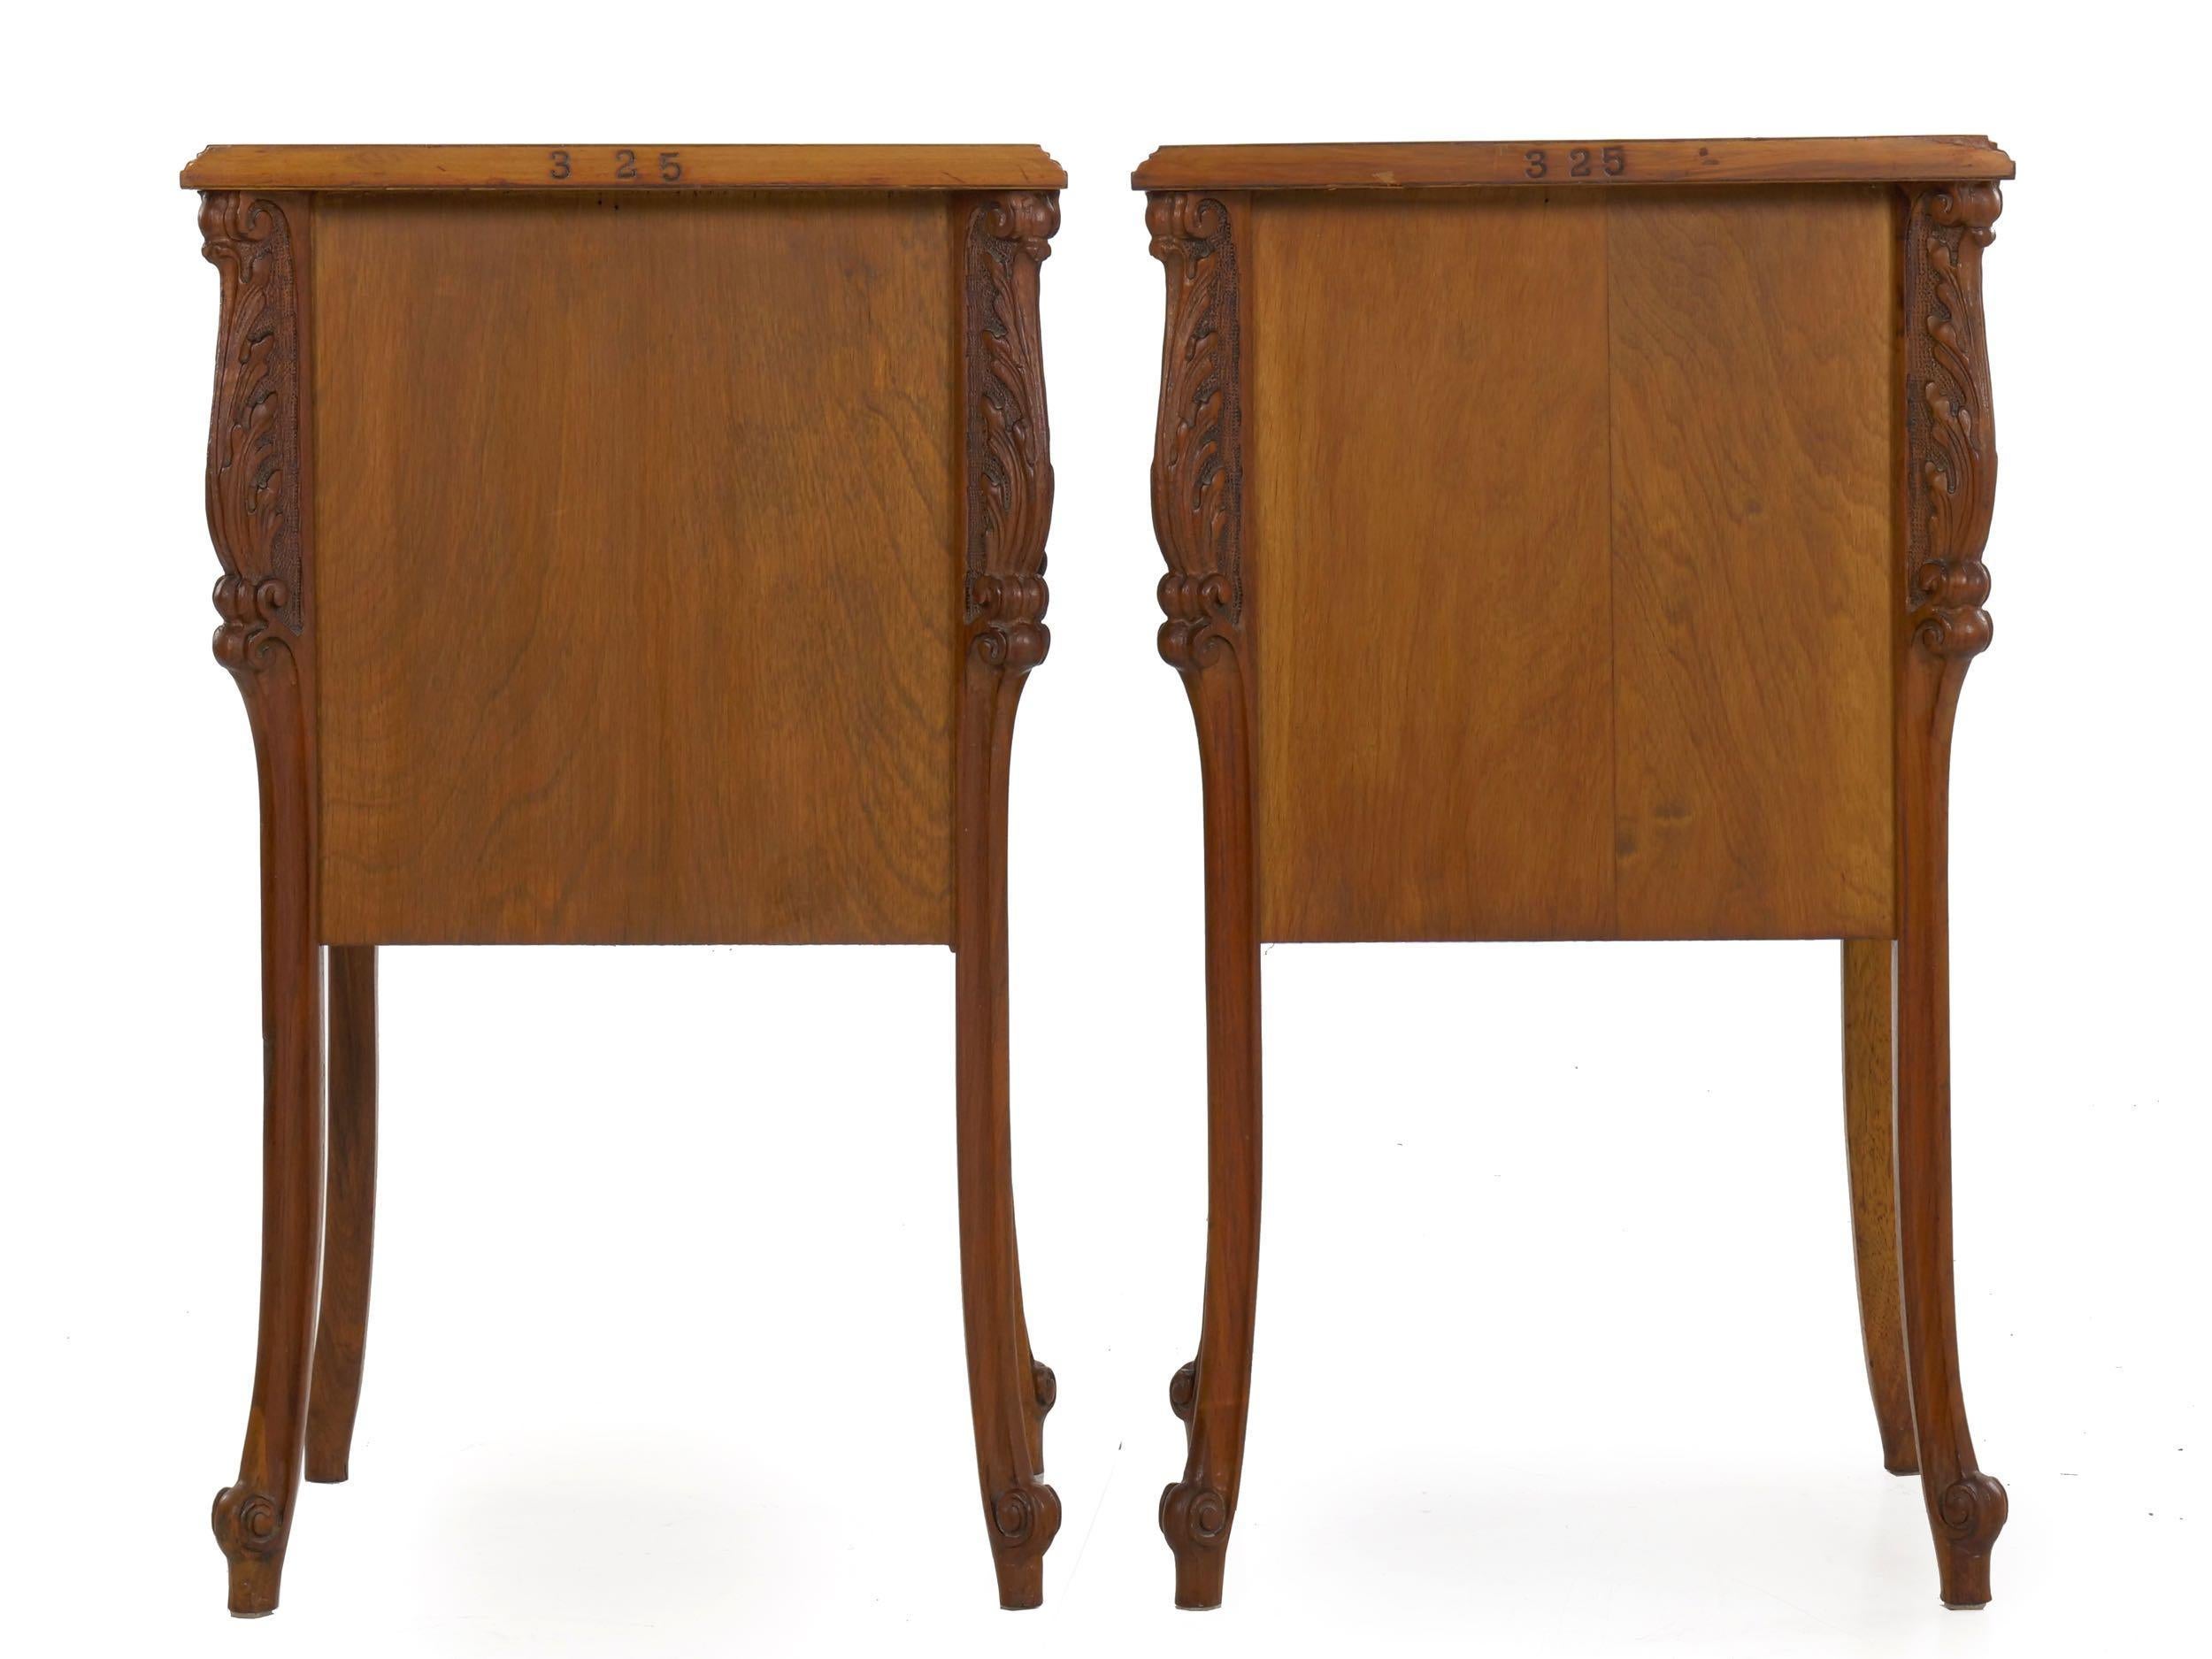 20th Century French Art Nouveau Carved Walnut Nightstand Tables, a Pair